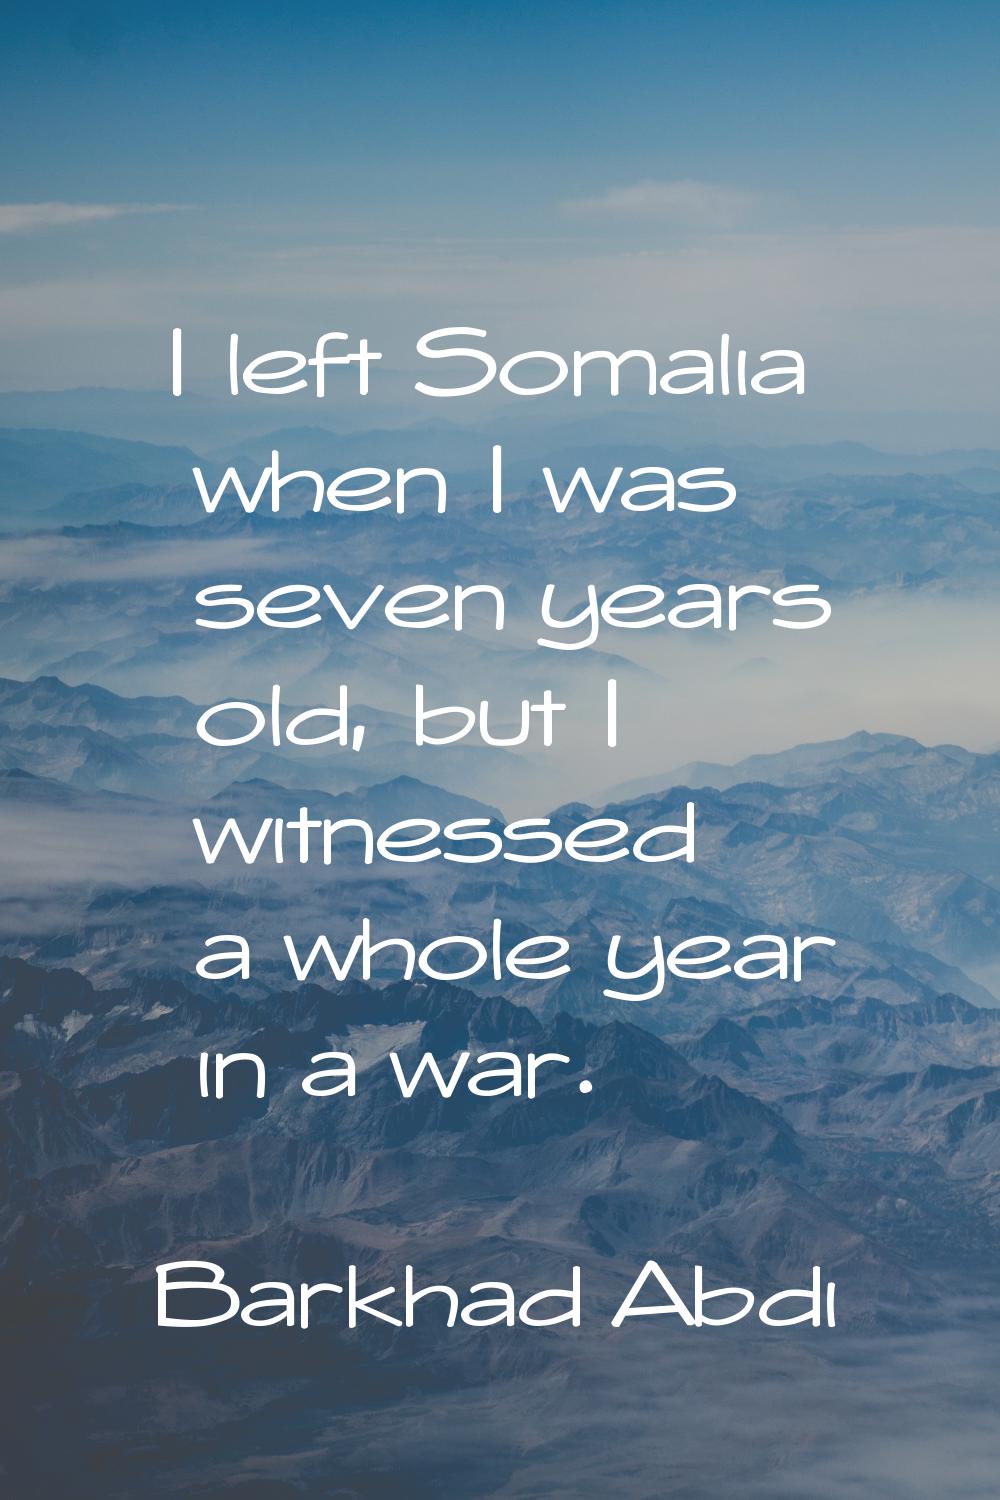 I left Somalia when I was seven years old, but I witnessed a whole year in a war.